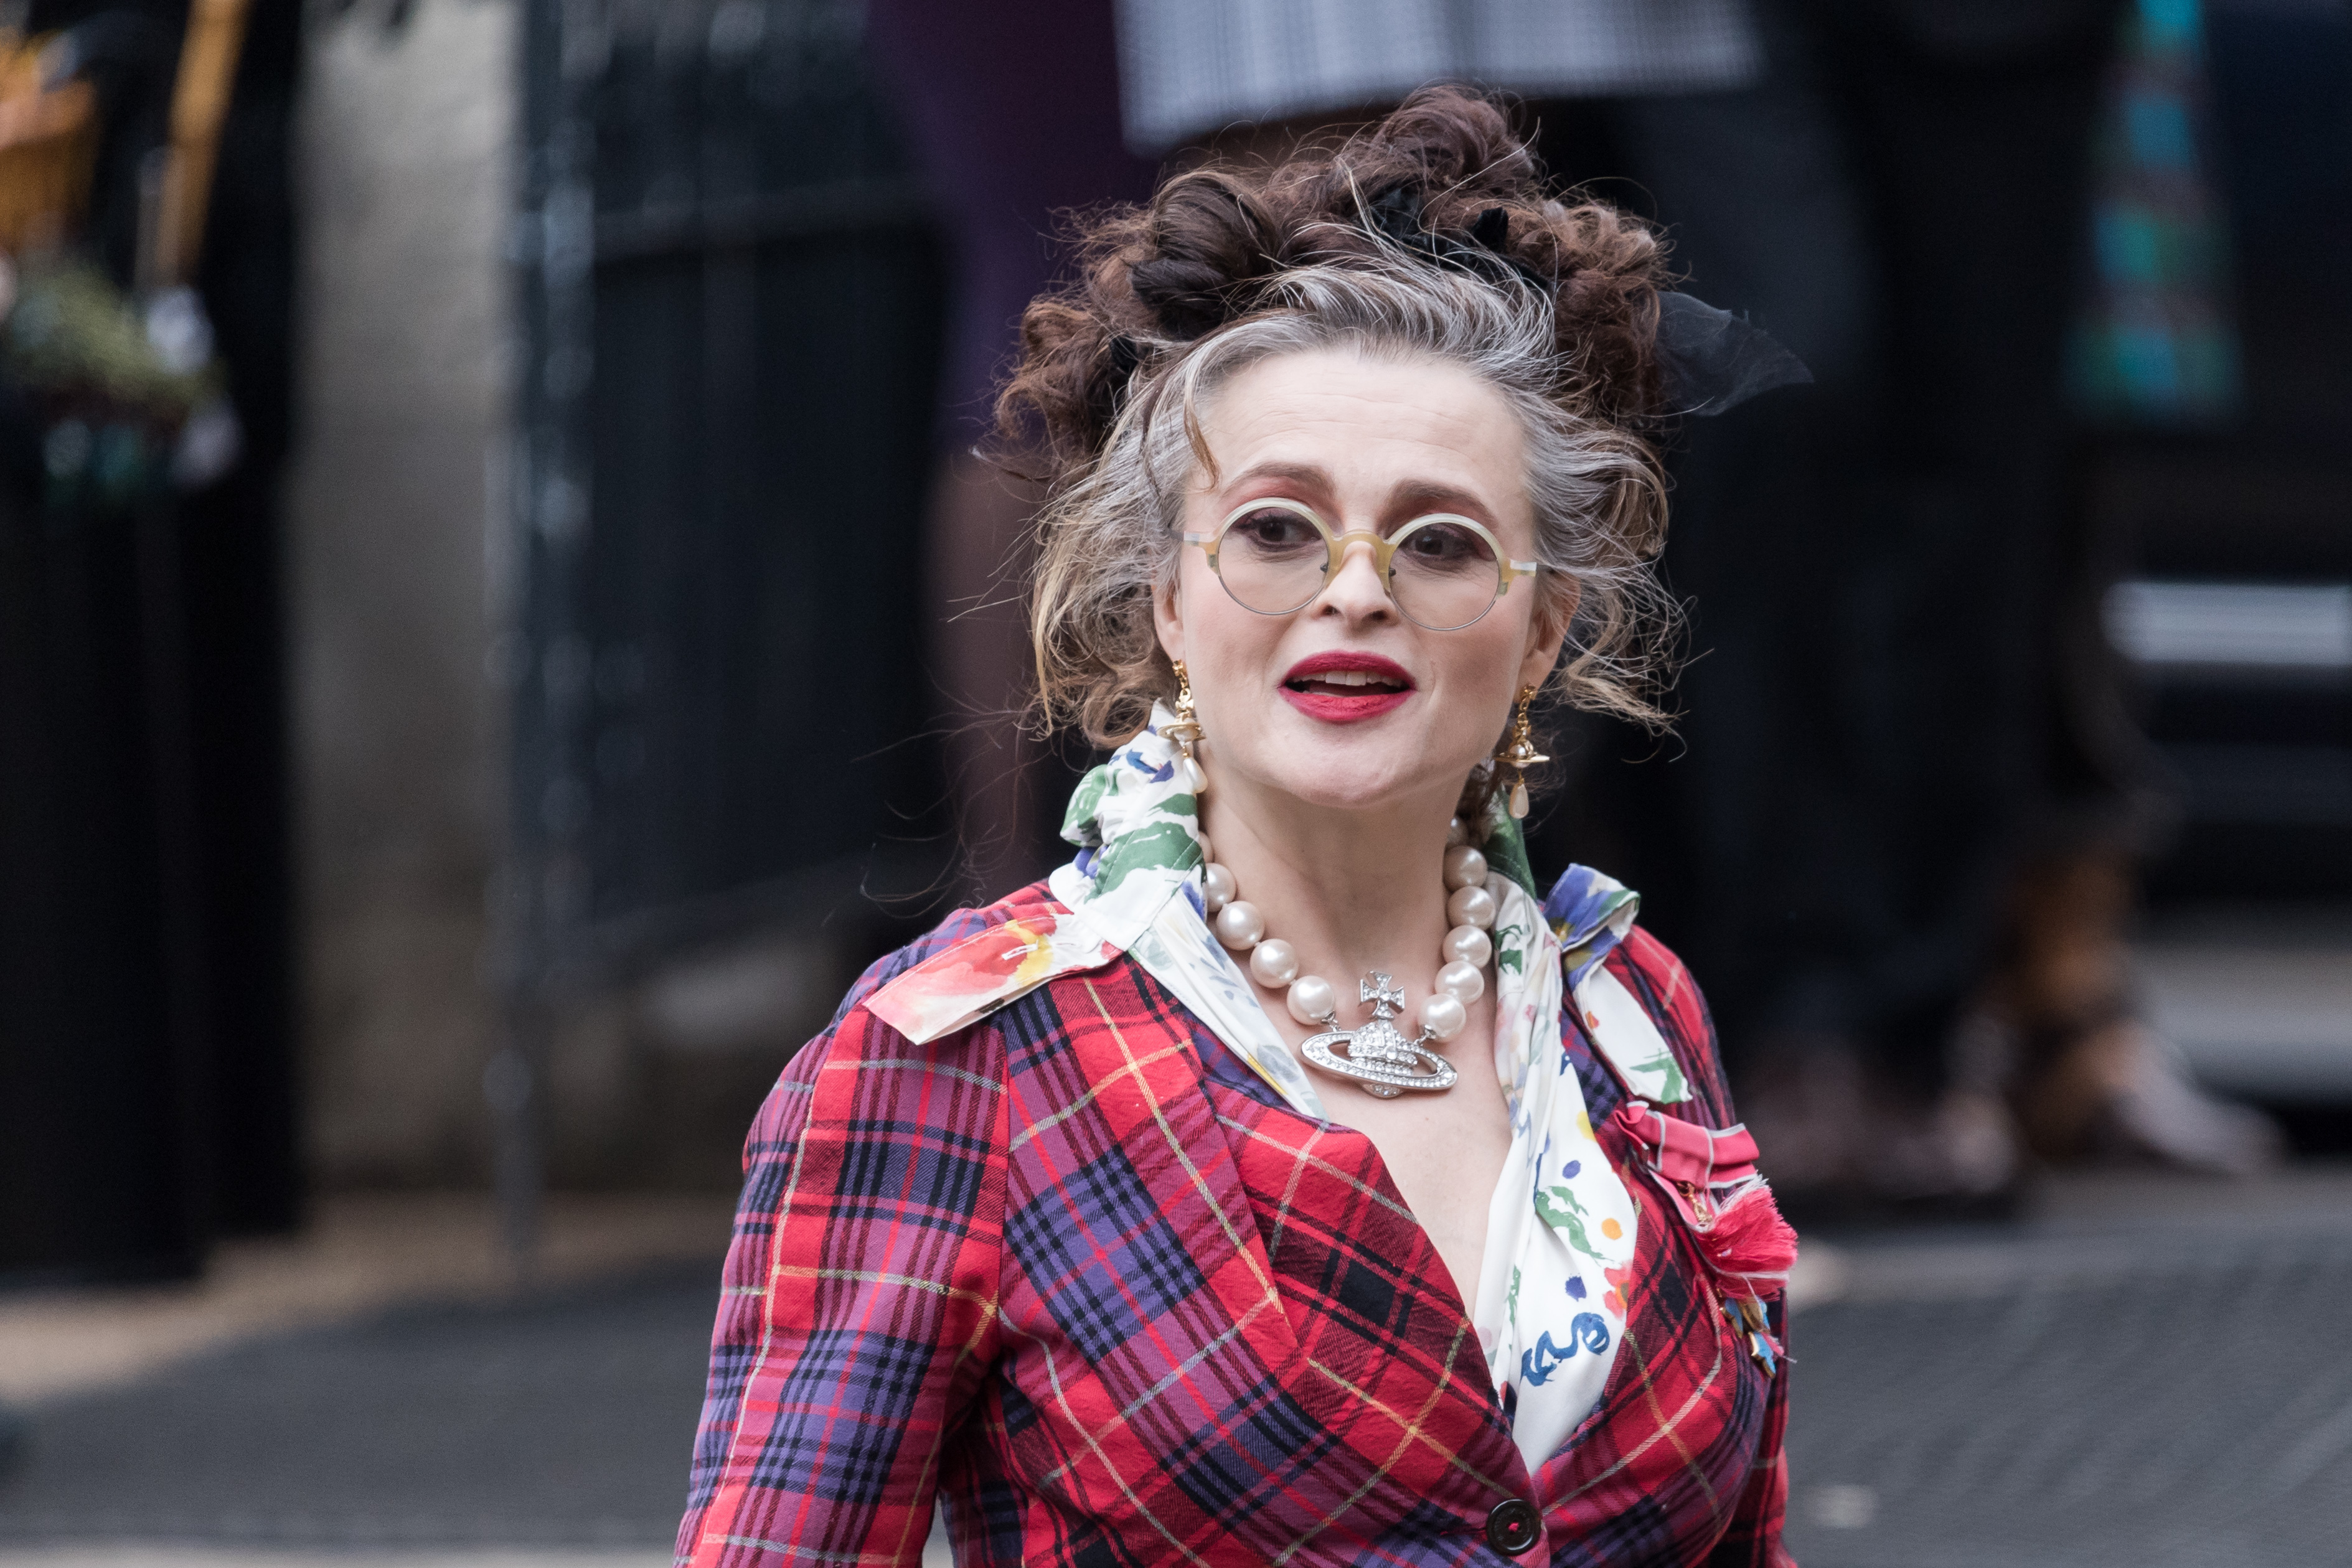 Helena Bonham Carter outside Southwark Cathedral on February 16, 2023 in London, United Kingdom. | Source: Getty Images